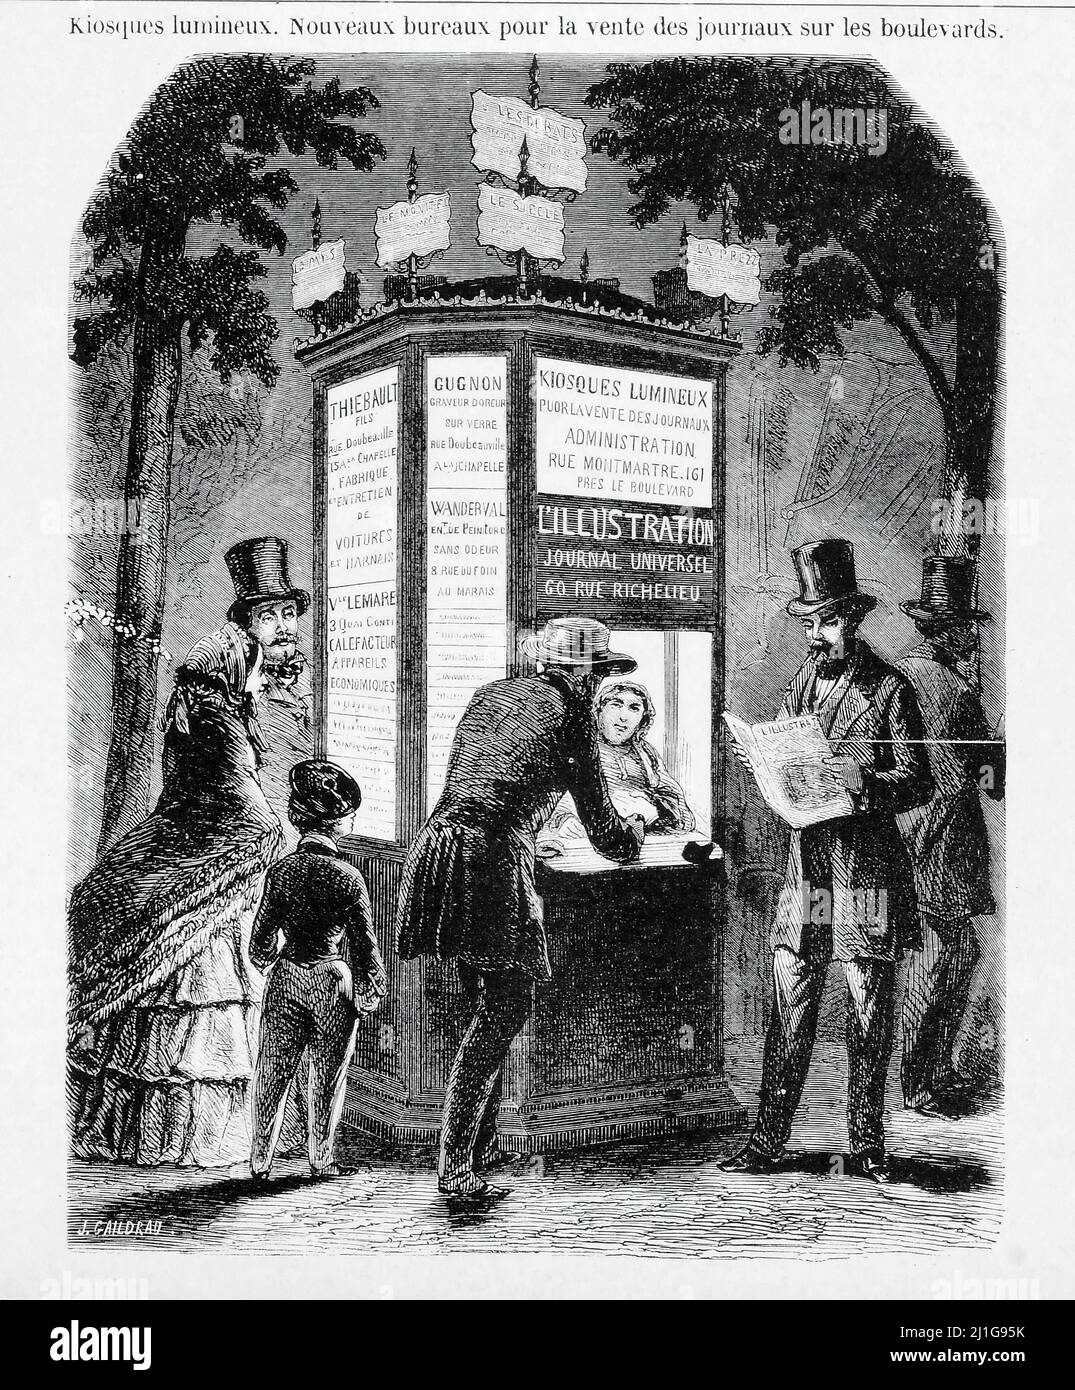 Eng translation : ' Illuminated kiosks. New offices for the sale of newspapers on the boulevards. ' - Original in French : ' Kiosques lumineux. Nouveaux bureaux pour la vente des journaux sur les boulevards.  ' - Extract from 'L'Illustration Journal Universel' - French illustrated magazine - 1843 Stock Photo